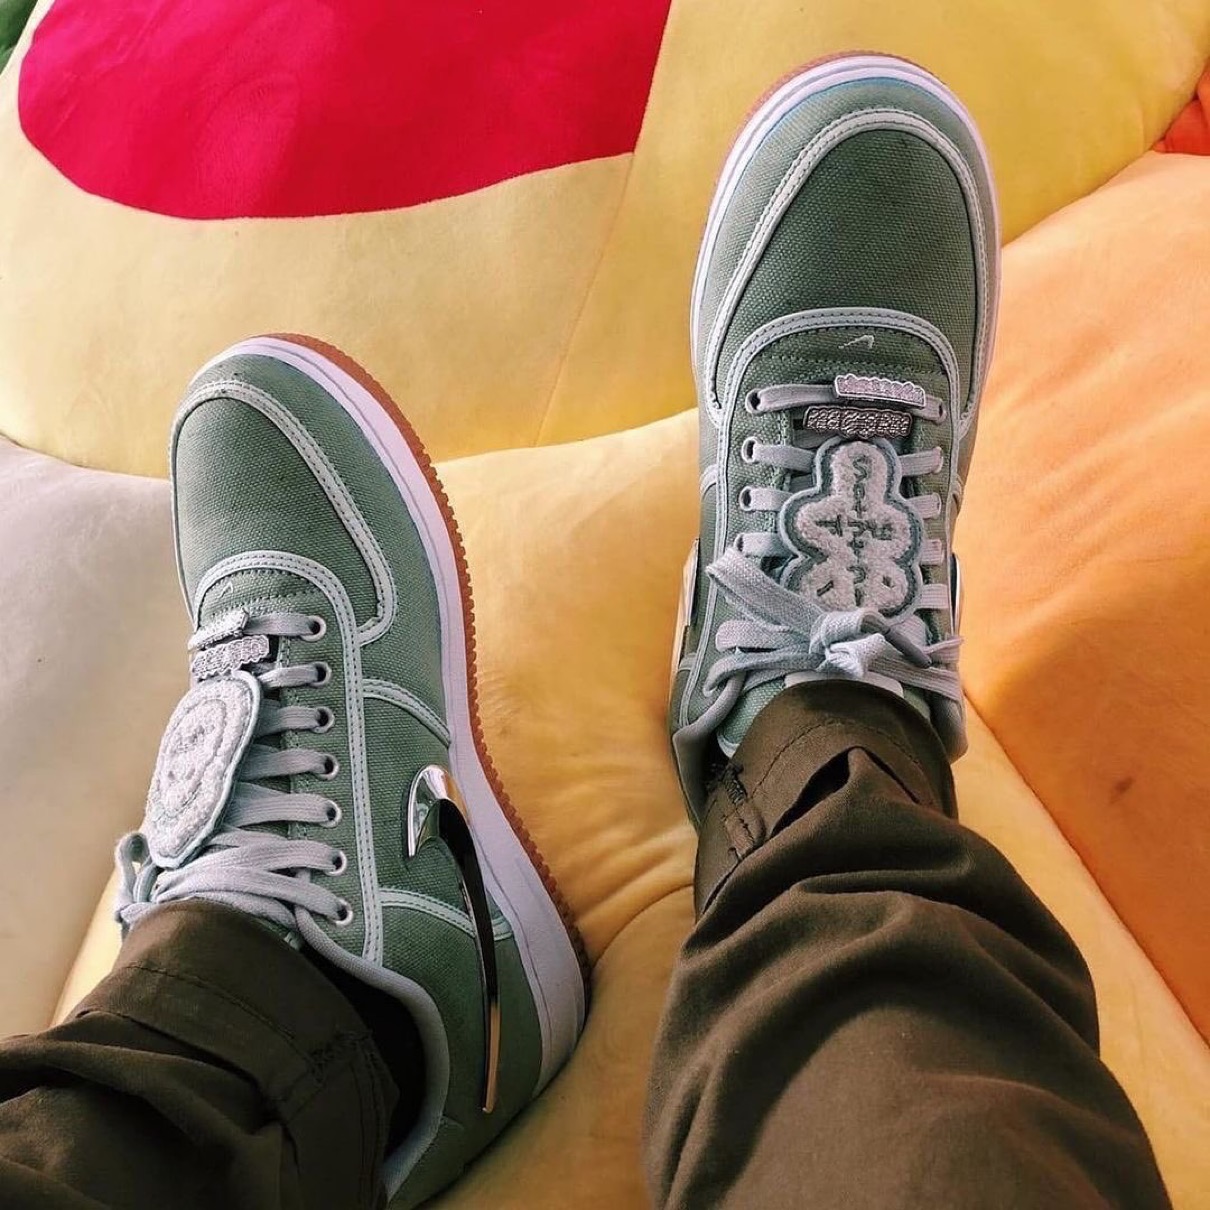 Travis Scott × Nike】Air Force 1 Low “Green”がリーク | UP TO DATE